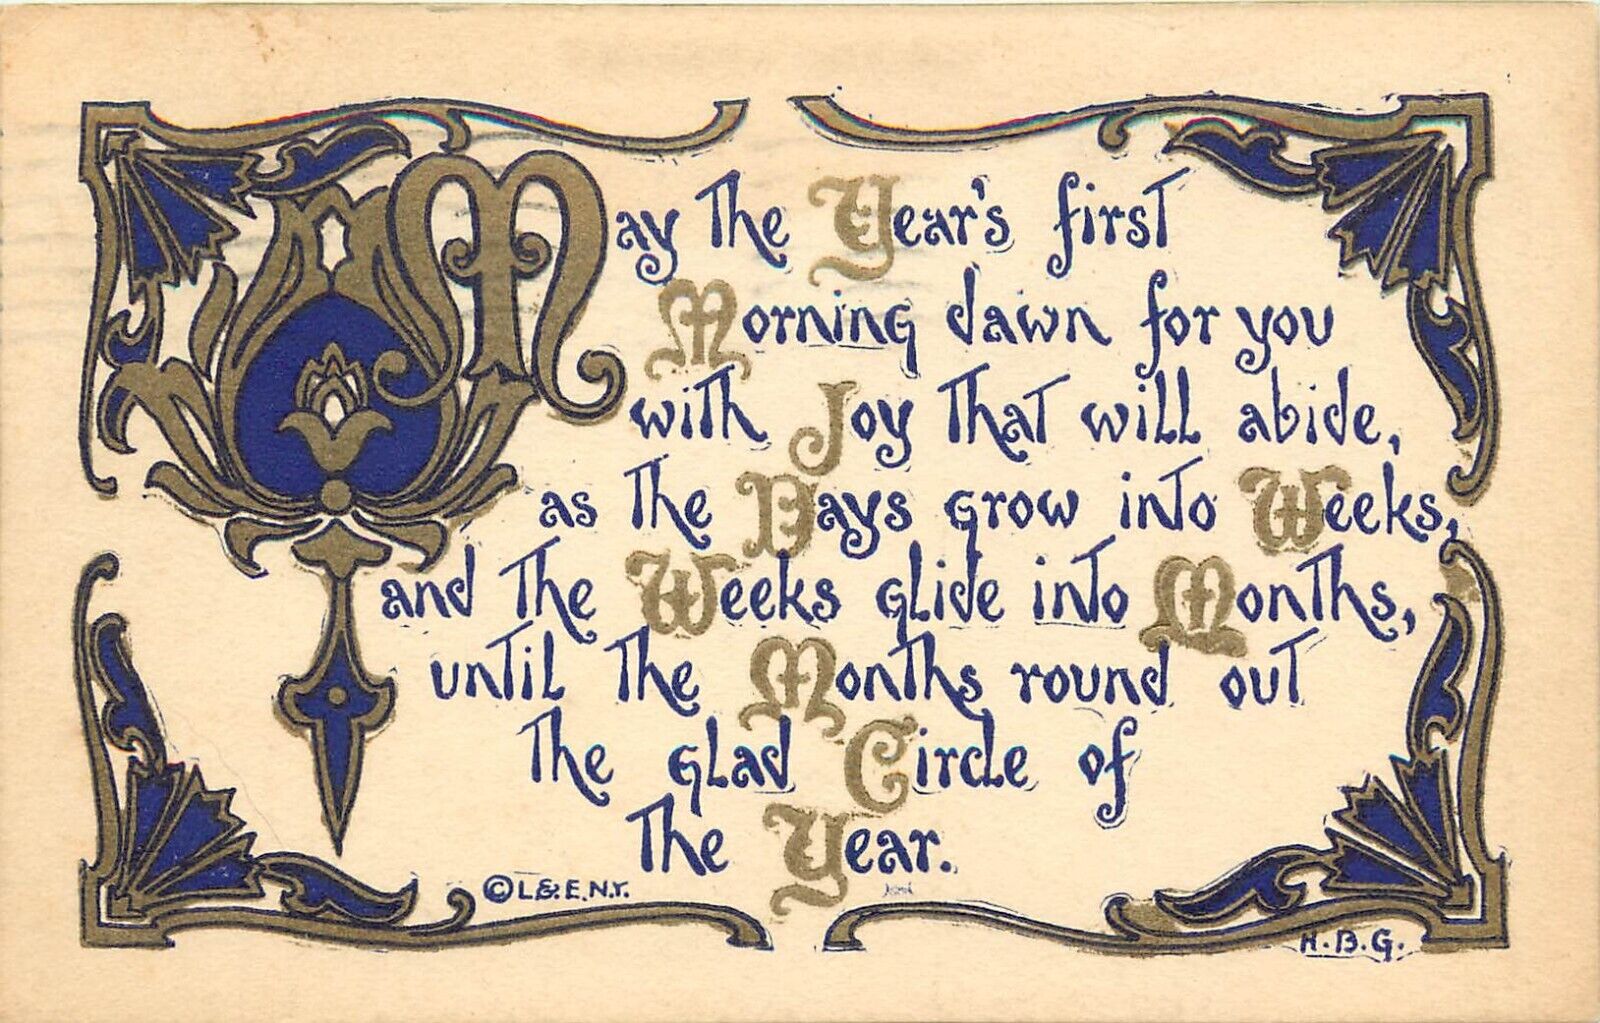 c1910 H.B.G. New Year Postcard Calligraphy Design, Glad Circle of the Year